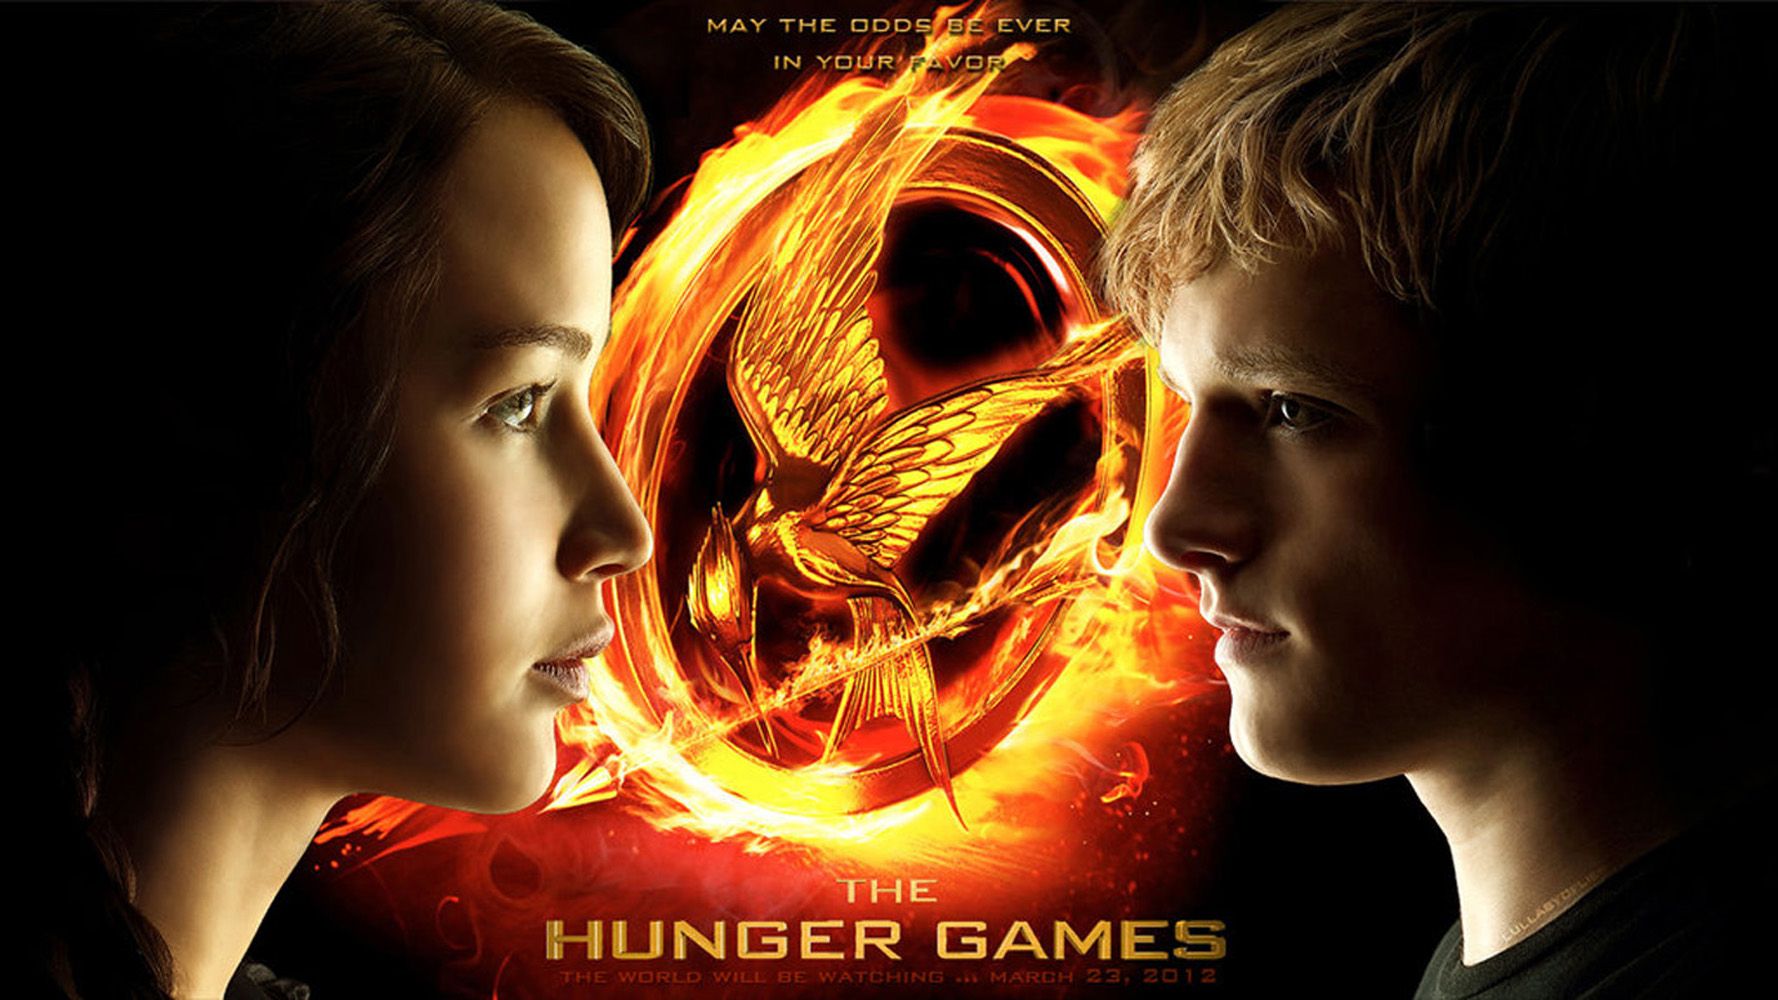 The Hunger Games Movie - wallpaper